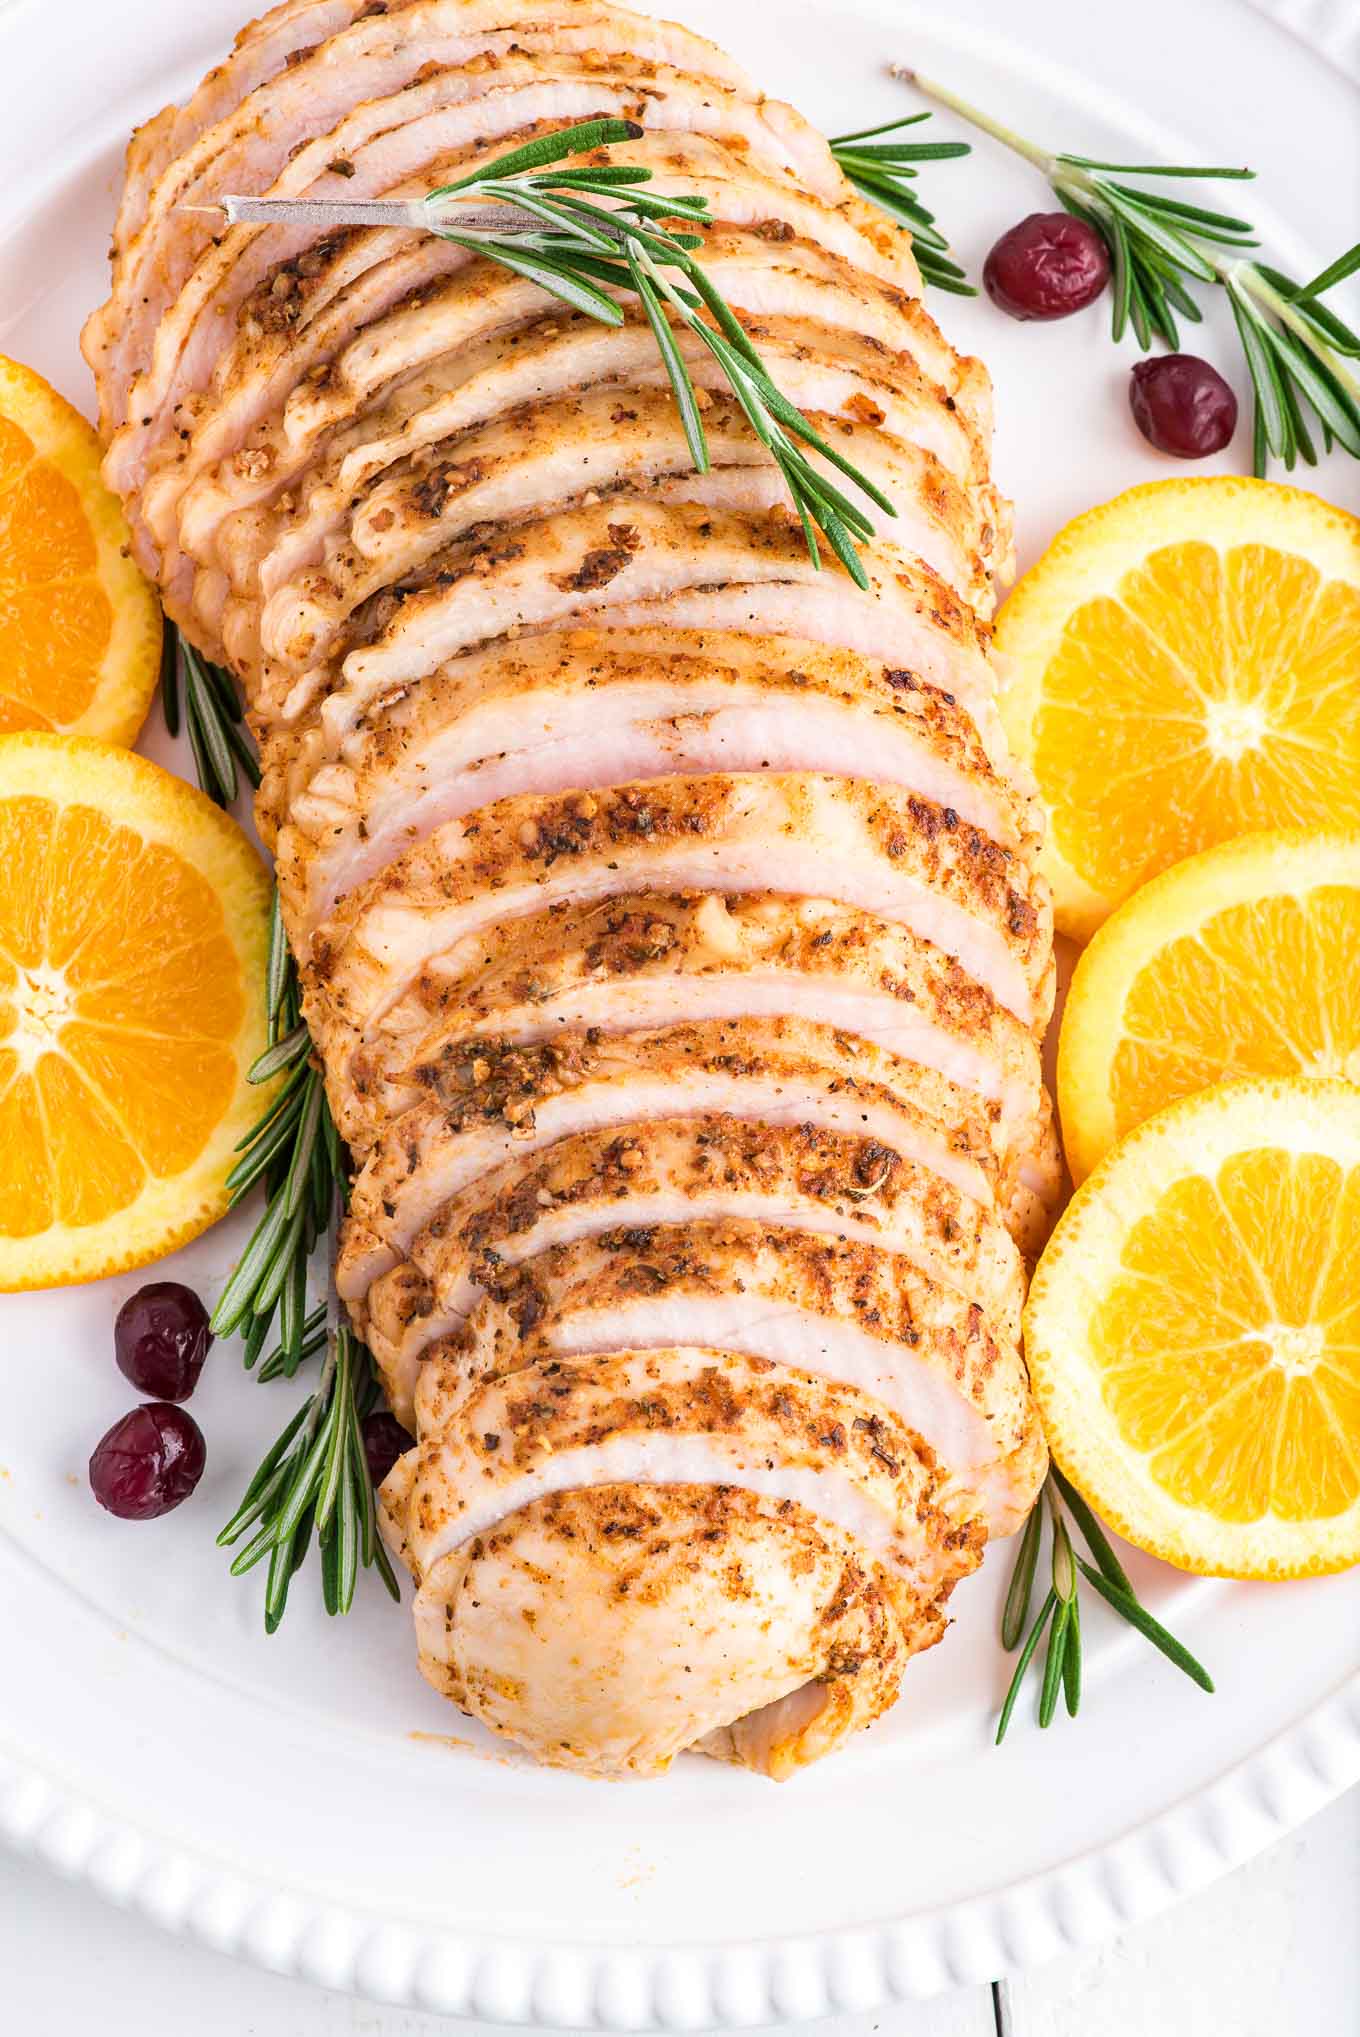 Oven roasted turkey breast sliced on a platter and surrounded by rosemary, citrus, and cranberries.